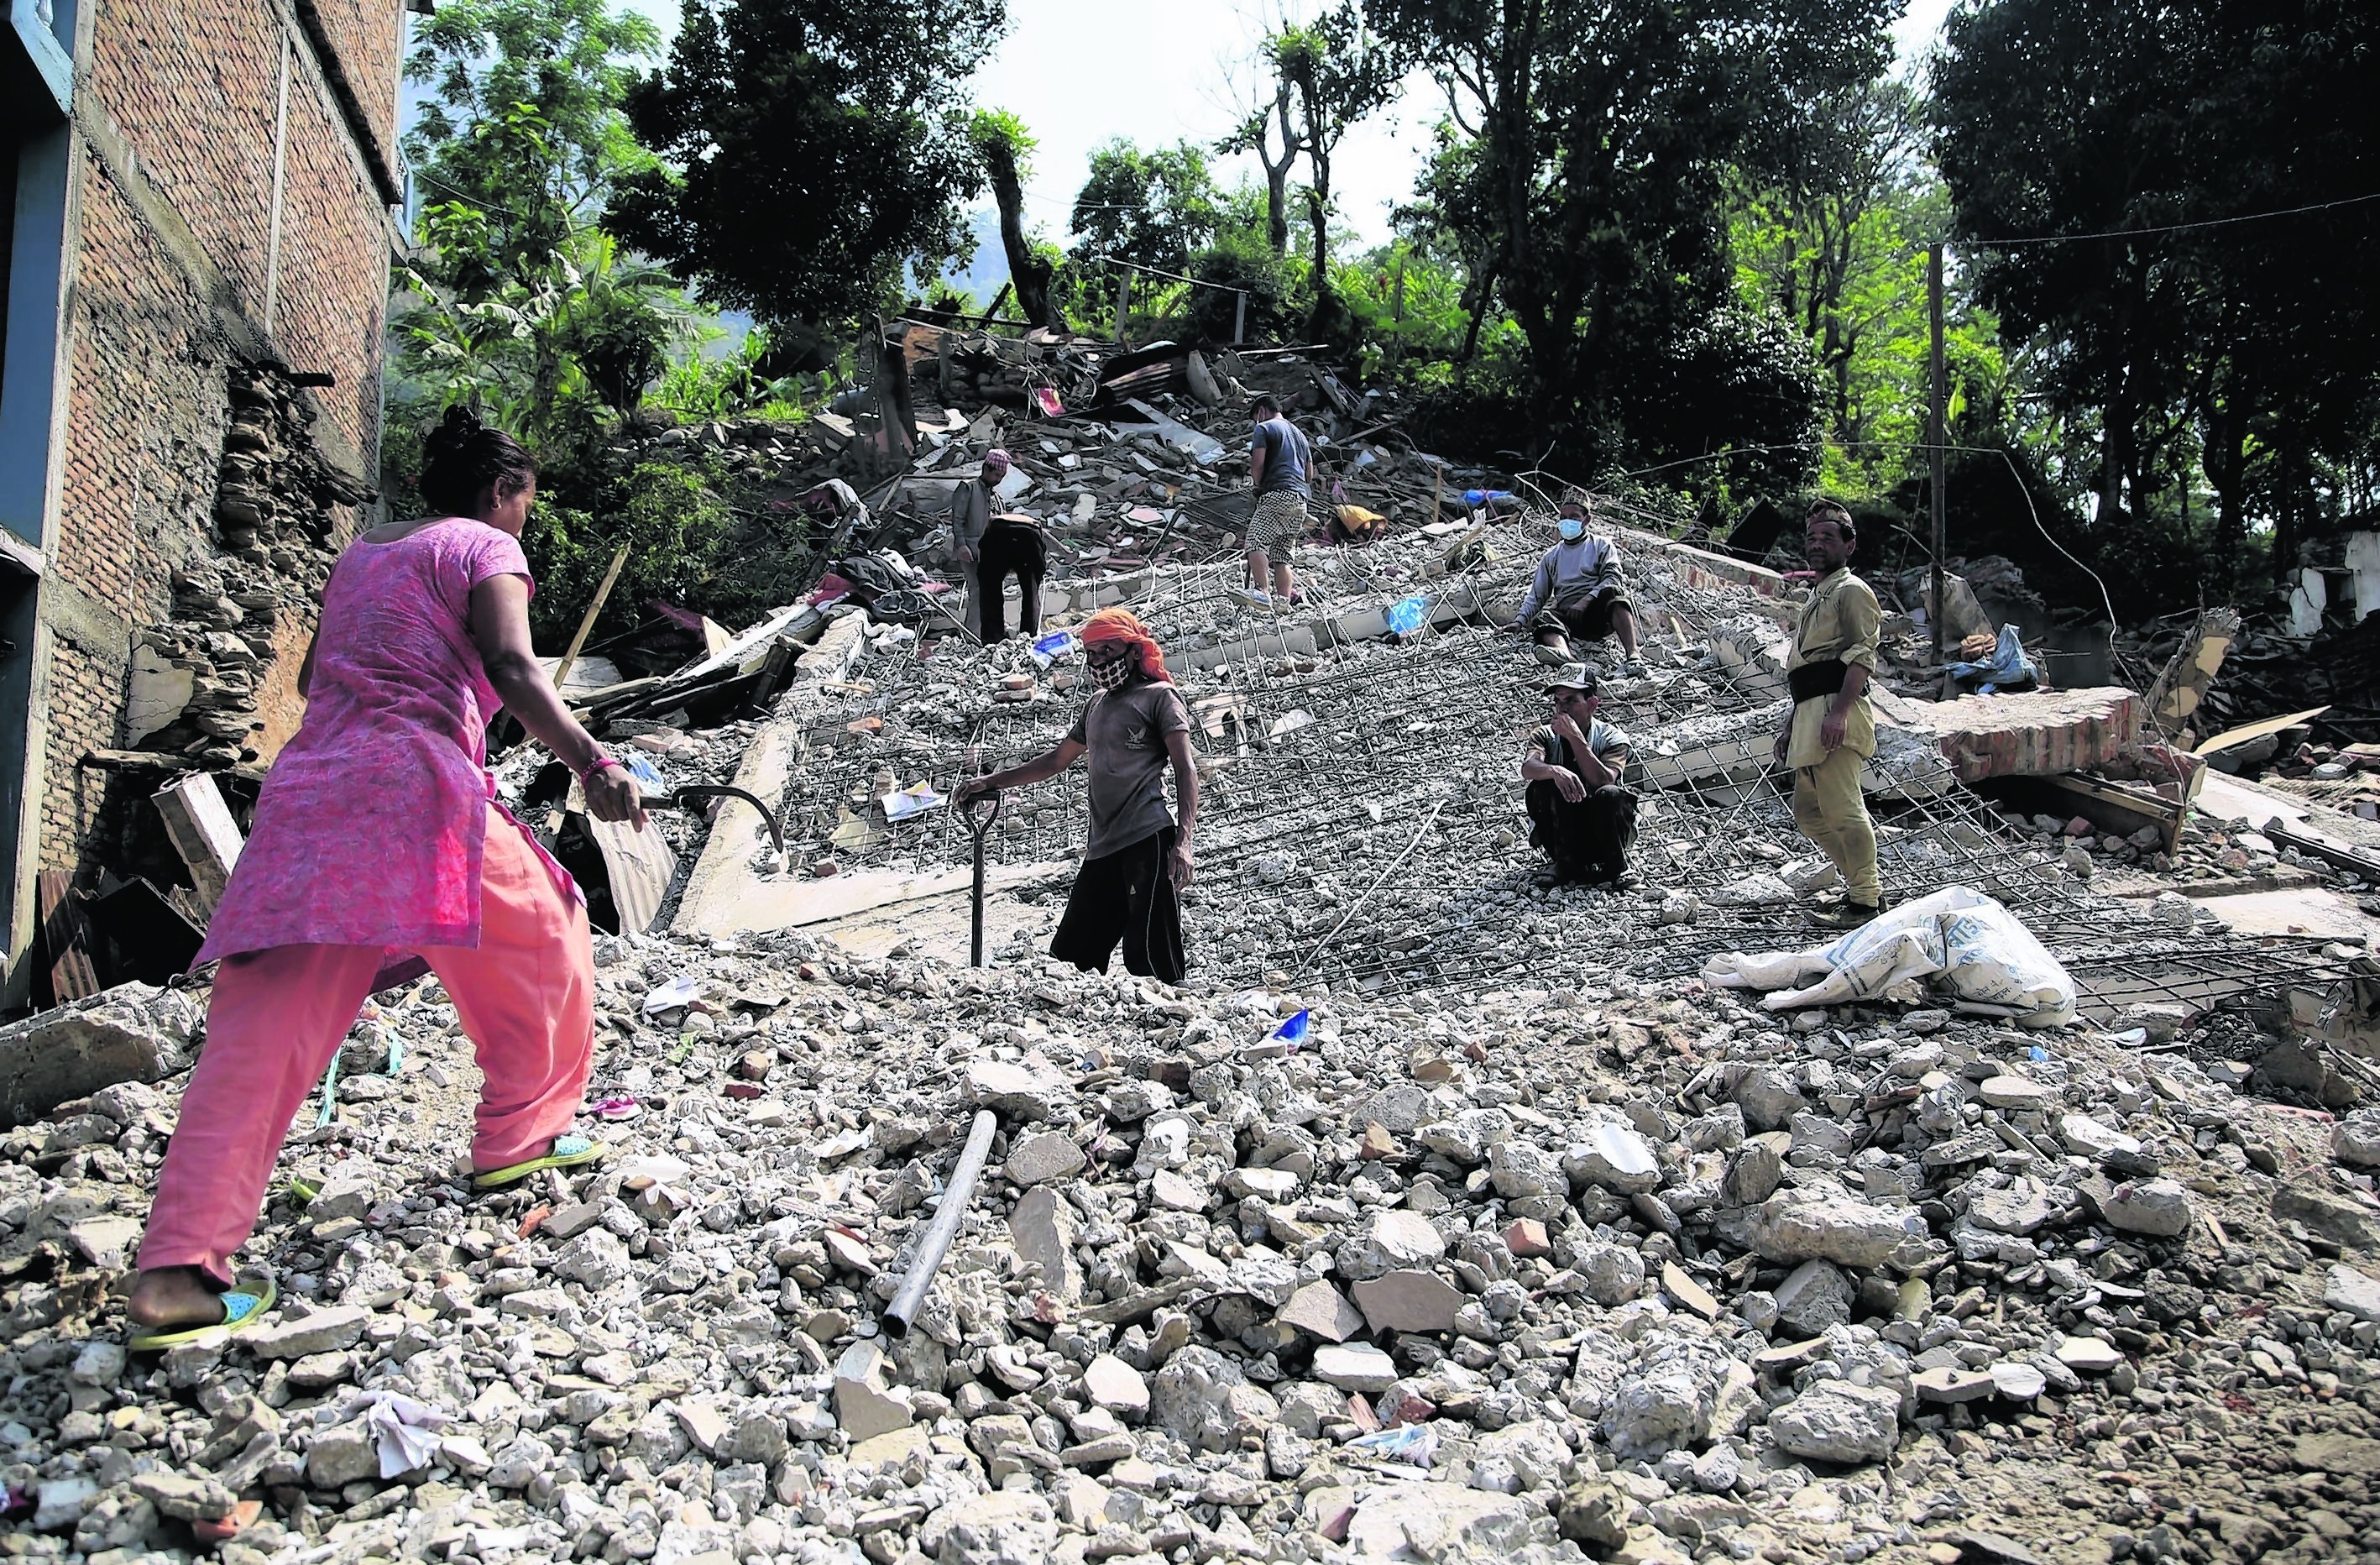 Nepali people collect usable belongings amid the debris of destroyed houses at Lamosangu village in Sindhupalchowk, Nepal after the 7.8-magnitude earthquake